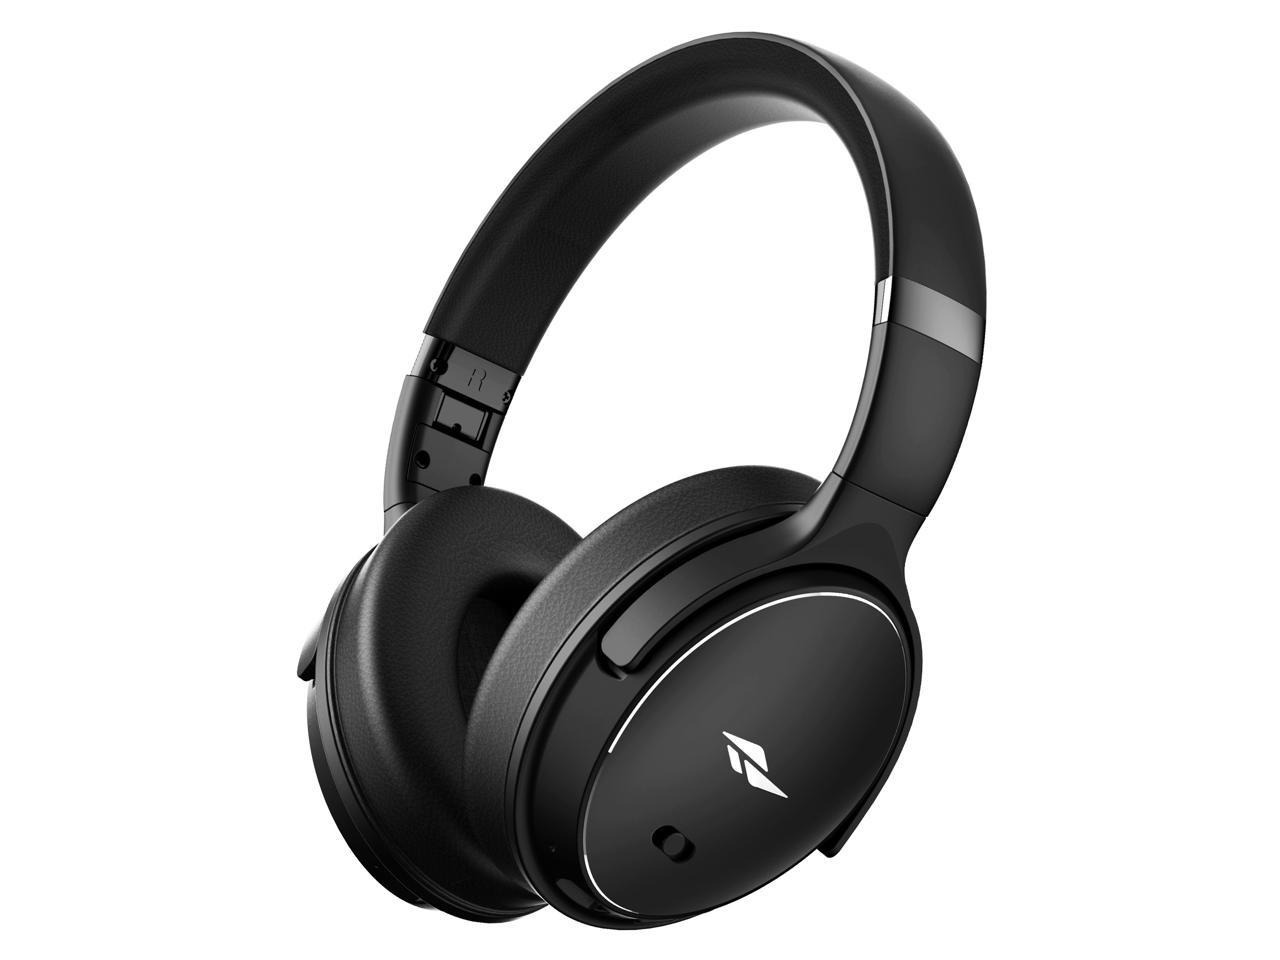 Rosewill SAROS C740S Active Noise Cancelling (ANC) Wireless Over-Ear Headphones $20 + Free shipping